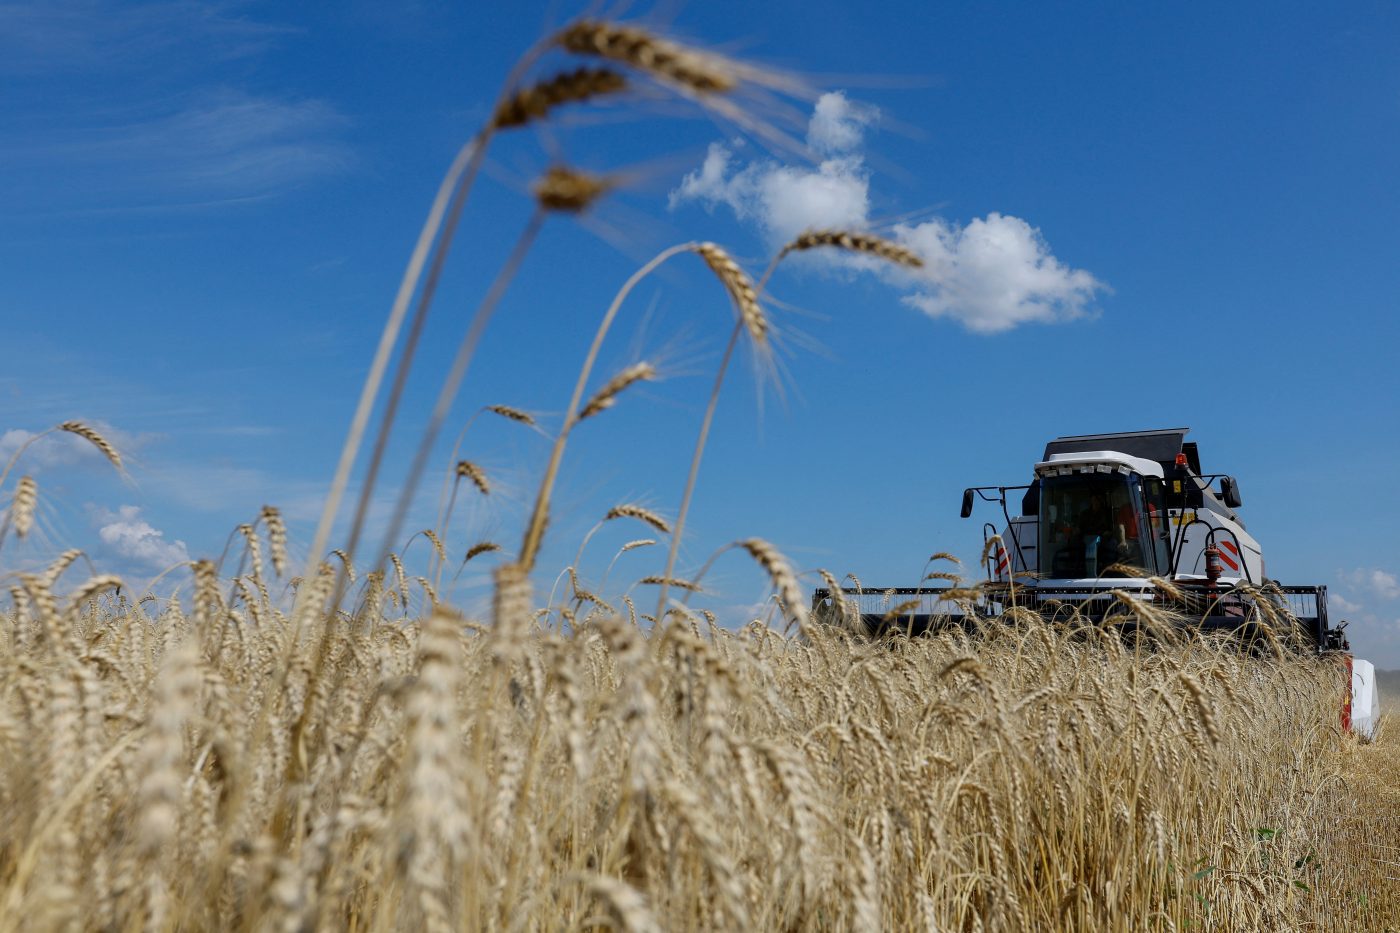 Photo: A farmer operates a combine while harvesting wheat in a field in the course of Russia's war in Ukraine near Luhansk, Ukraine, July 18, 2023. Credit: REUTERS/Alexander Ermochenko